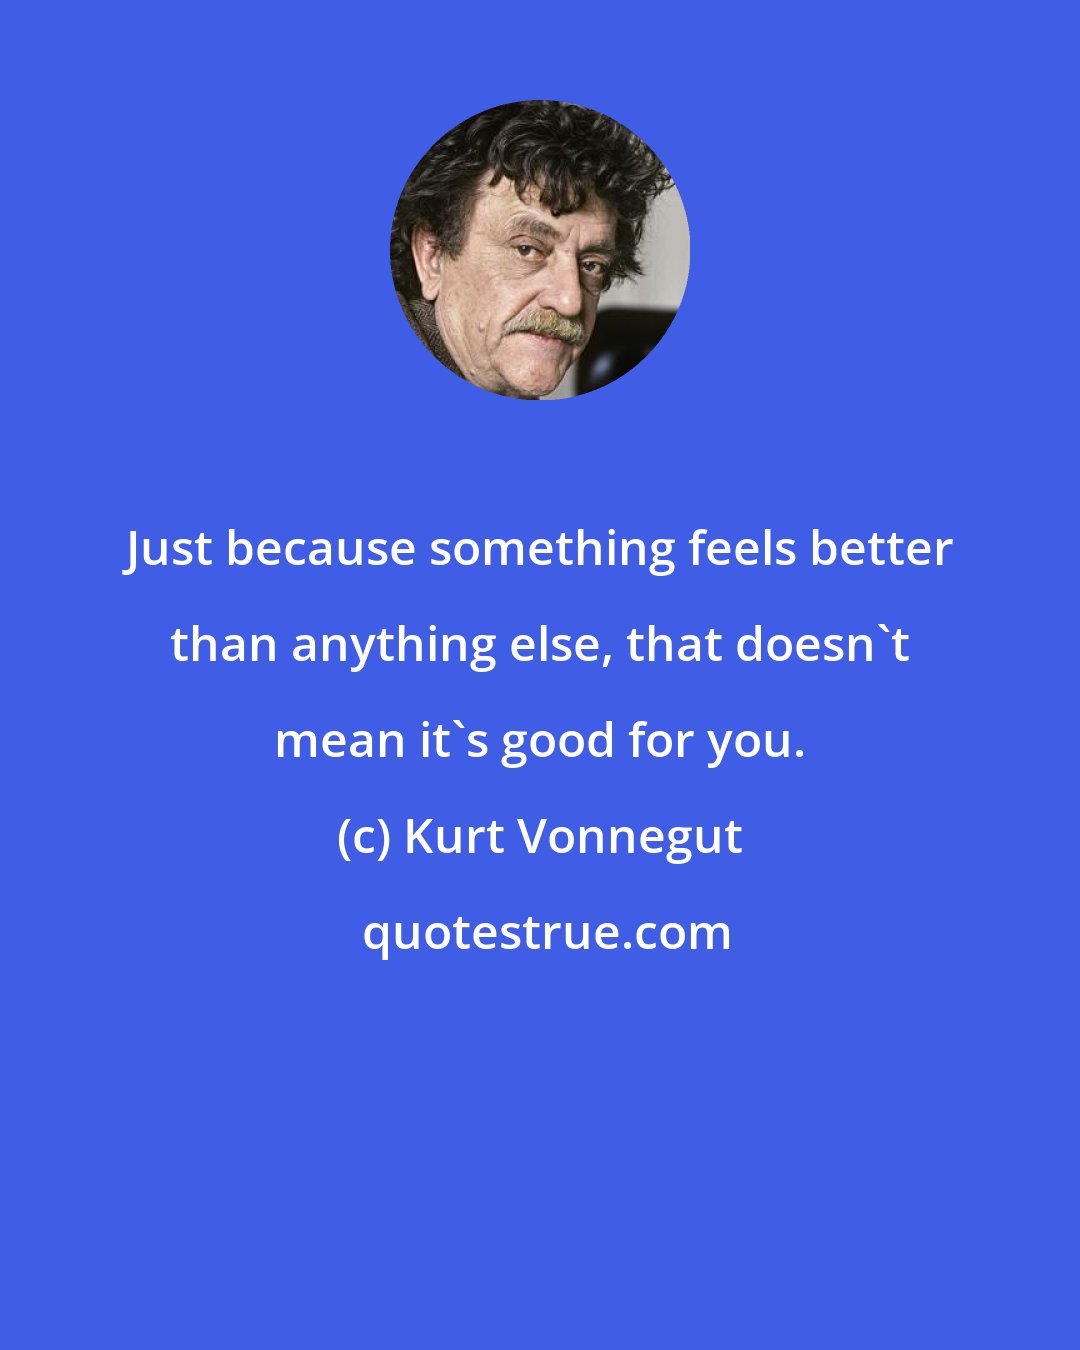 Kurt Vonnegut: Just because something feels better than anything else, that doesn't mean it's good for you.